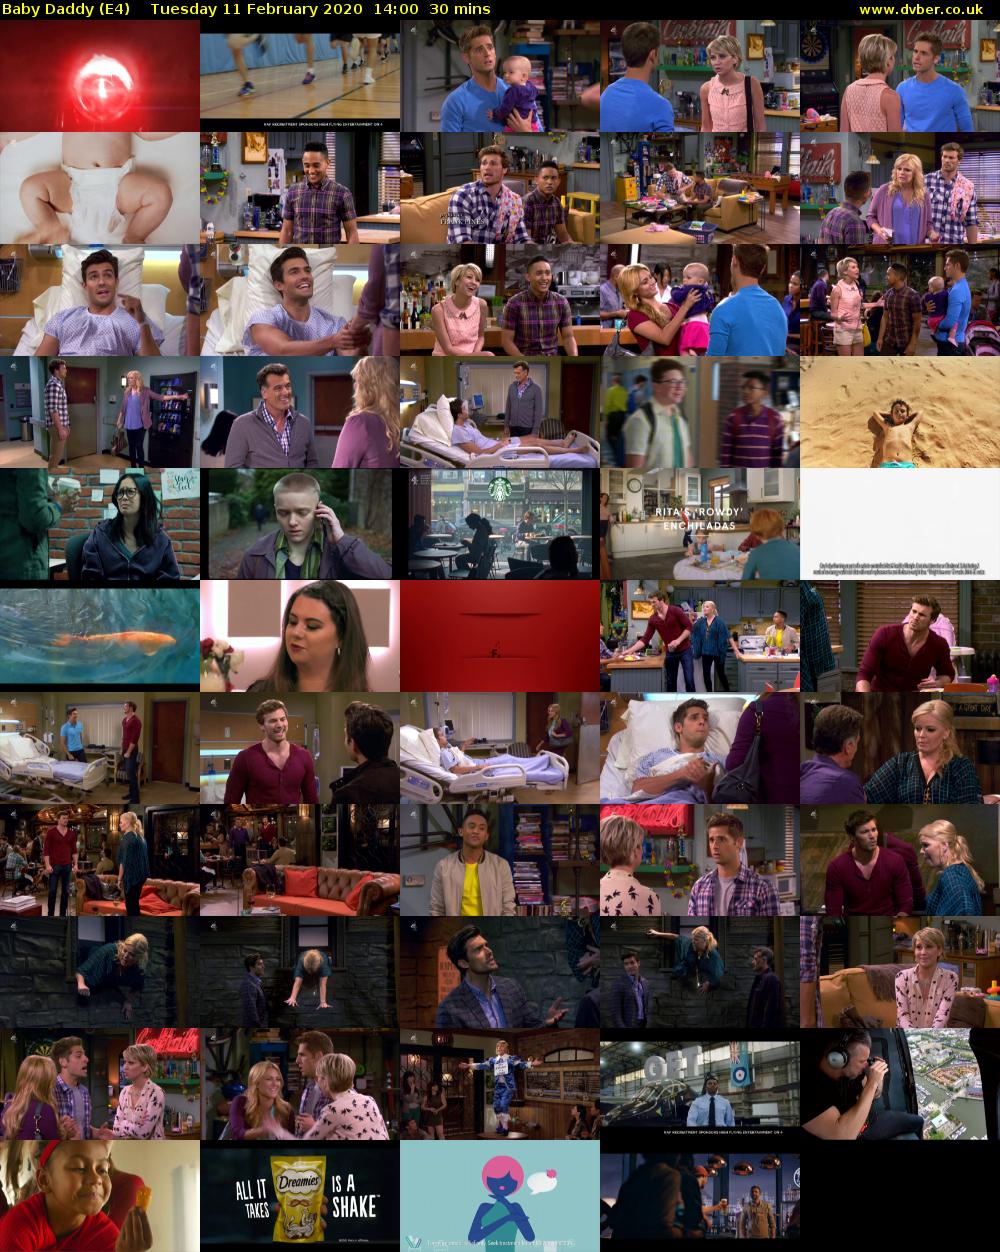 Baby Daddy (E4) Tuesday 11 February 2020 14:00 - 14:30